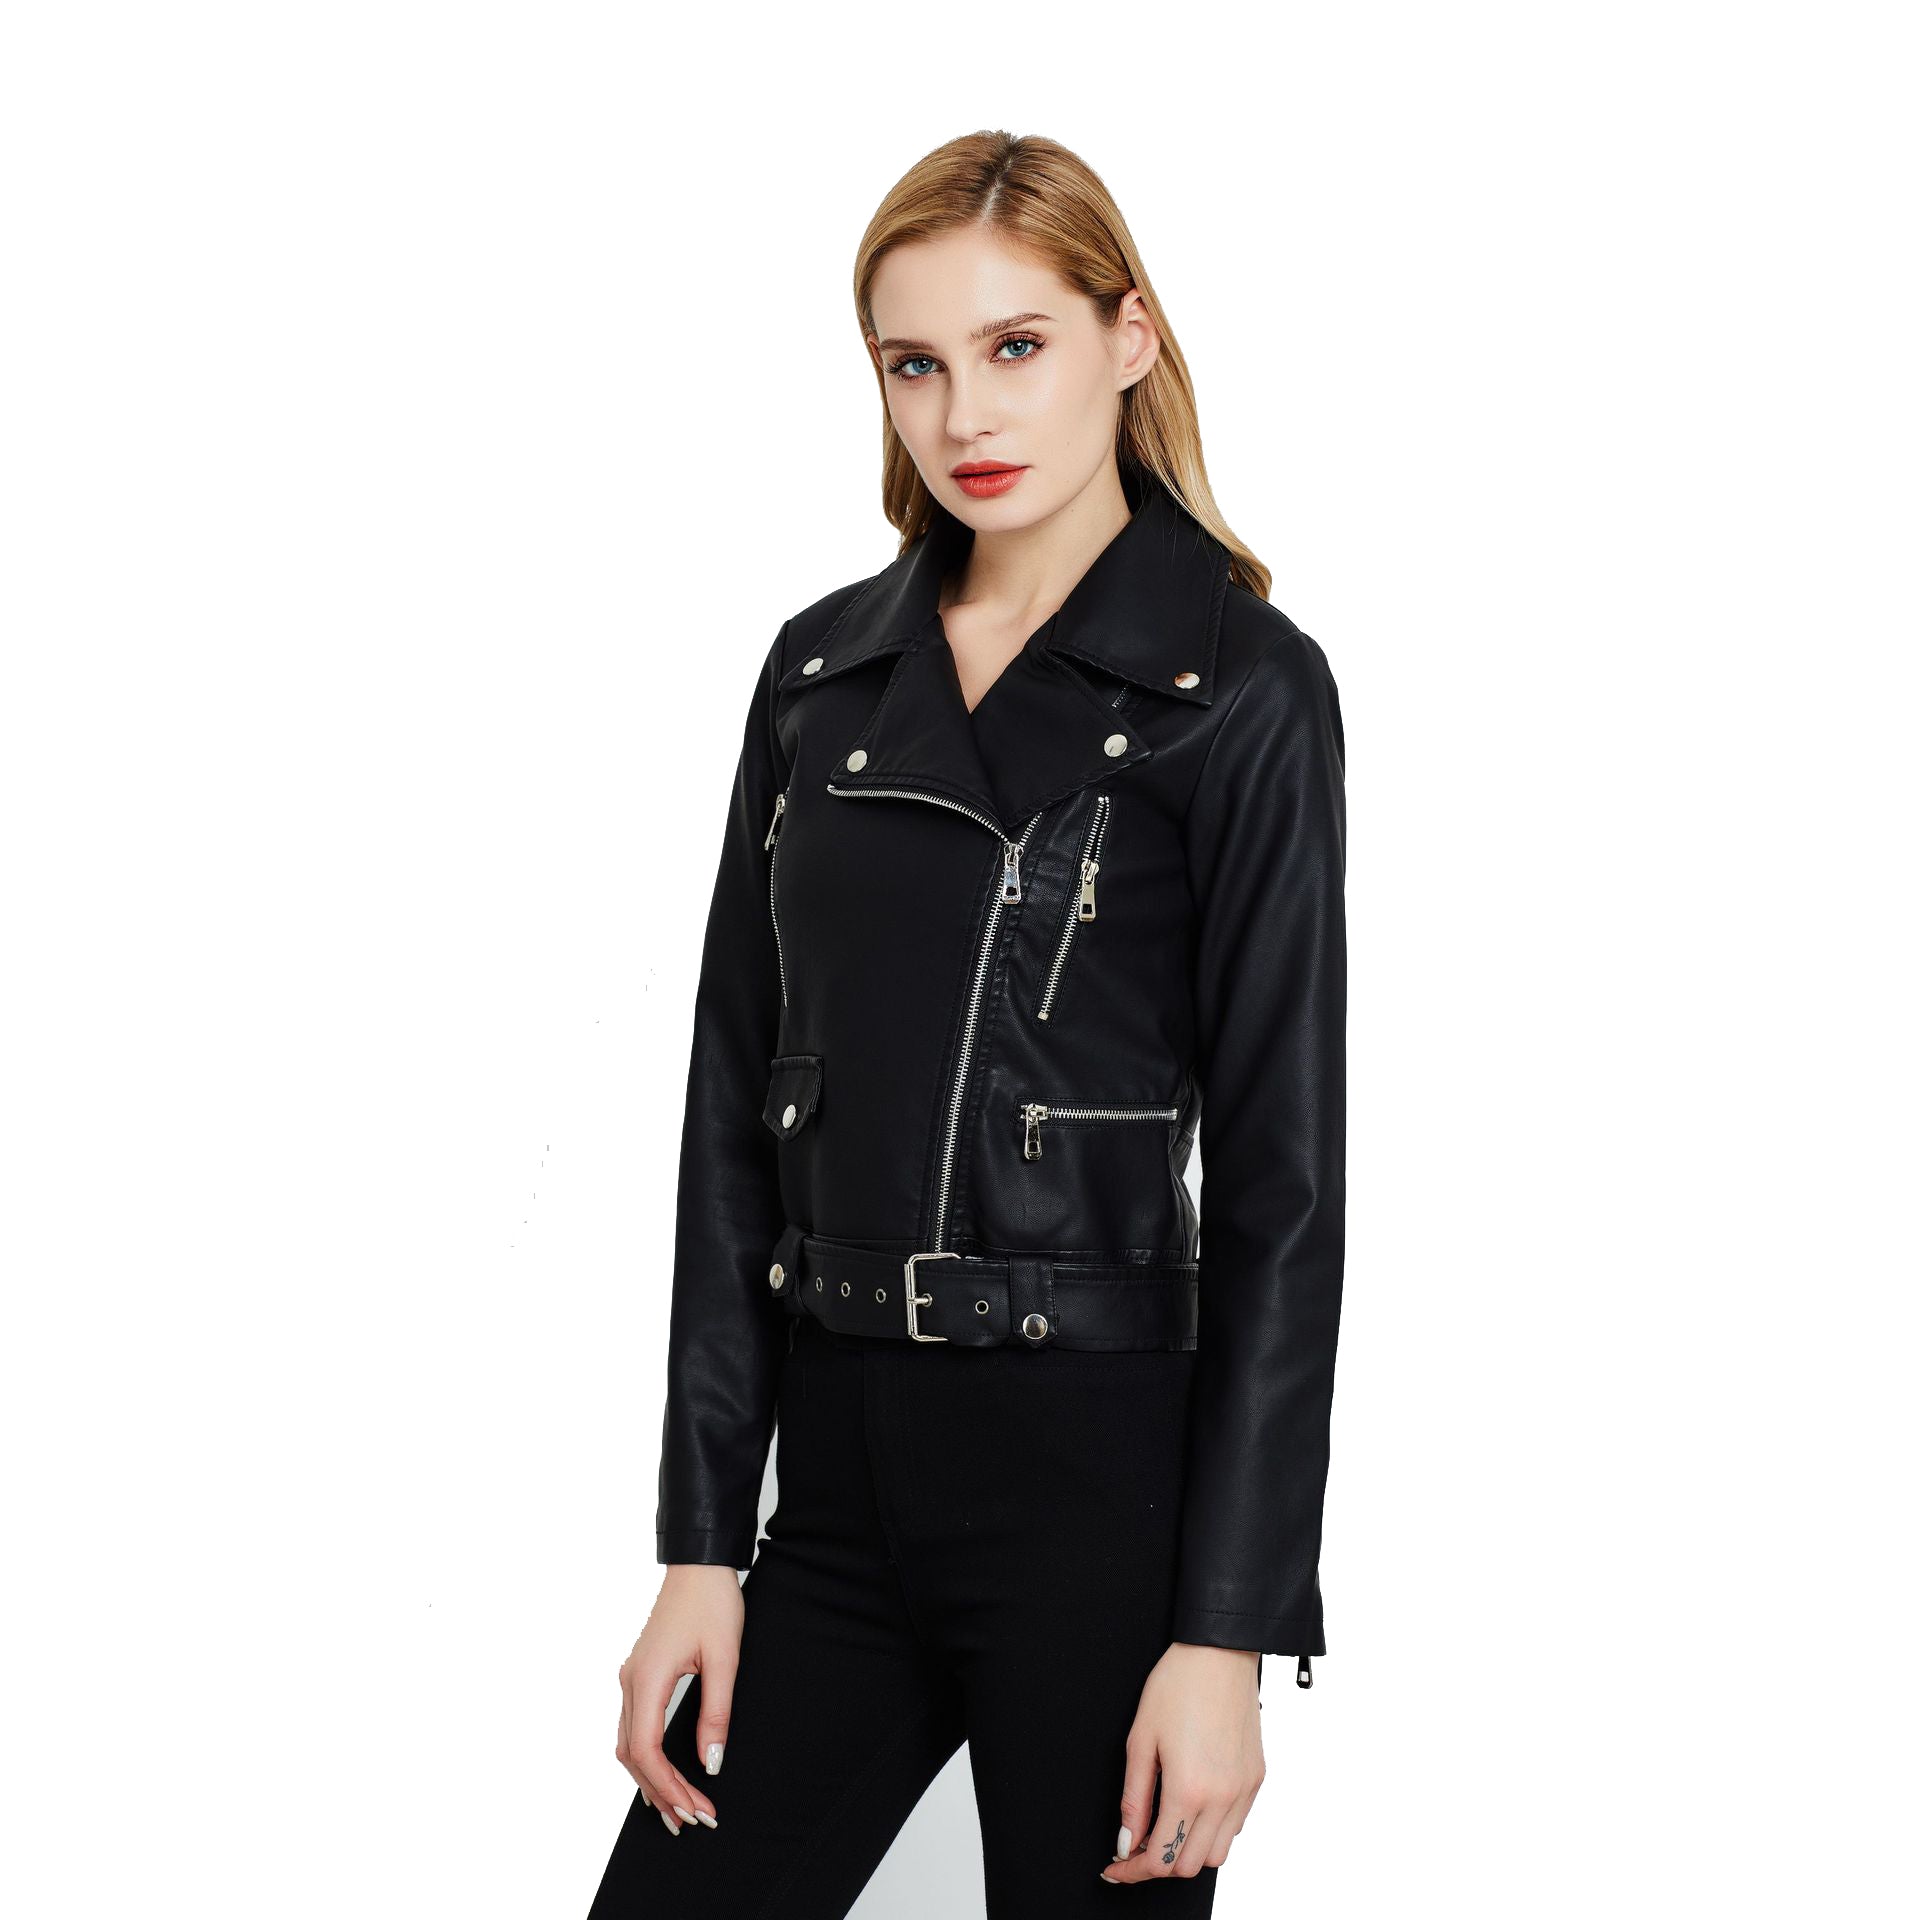 Sidiou Group Anniou High Quality Winter Solid Color Turn-Down Collar Slim Short Jacket Fashion Motorcycle Jacket Women PU Leather Jackets